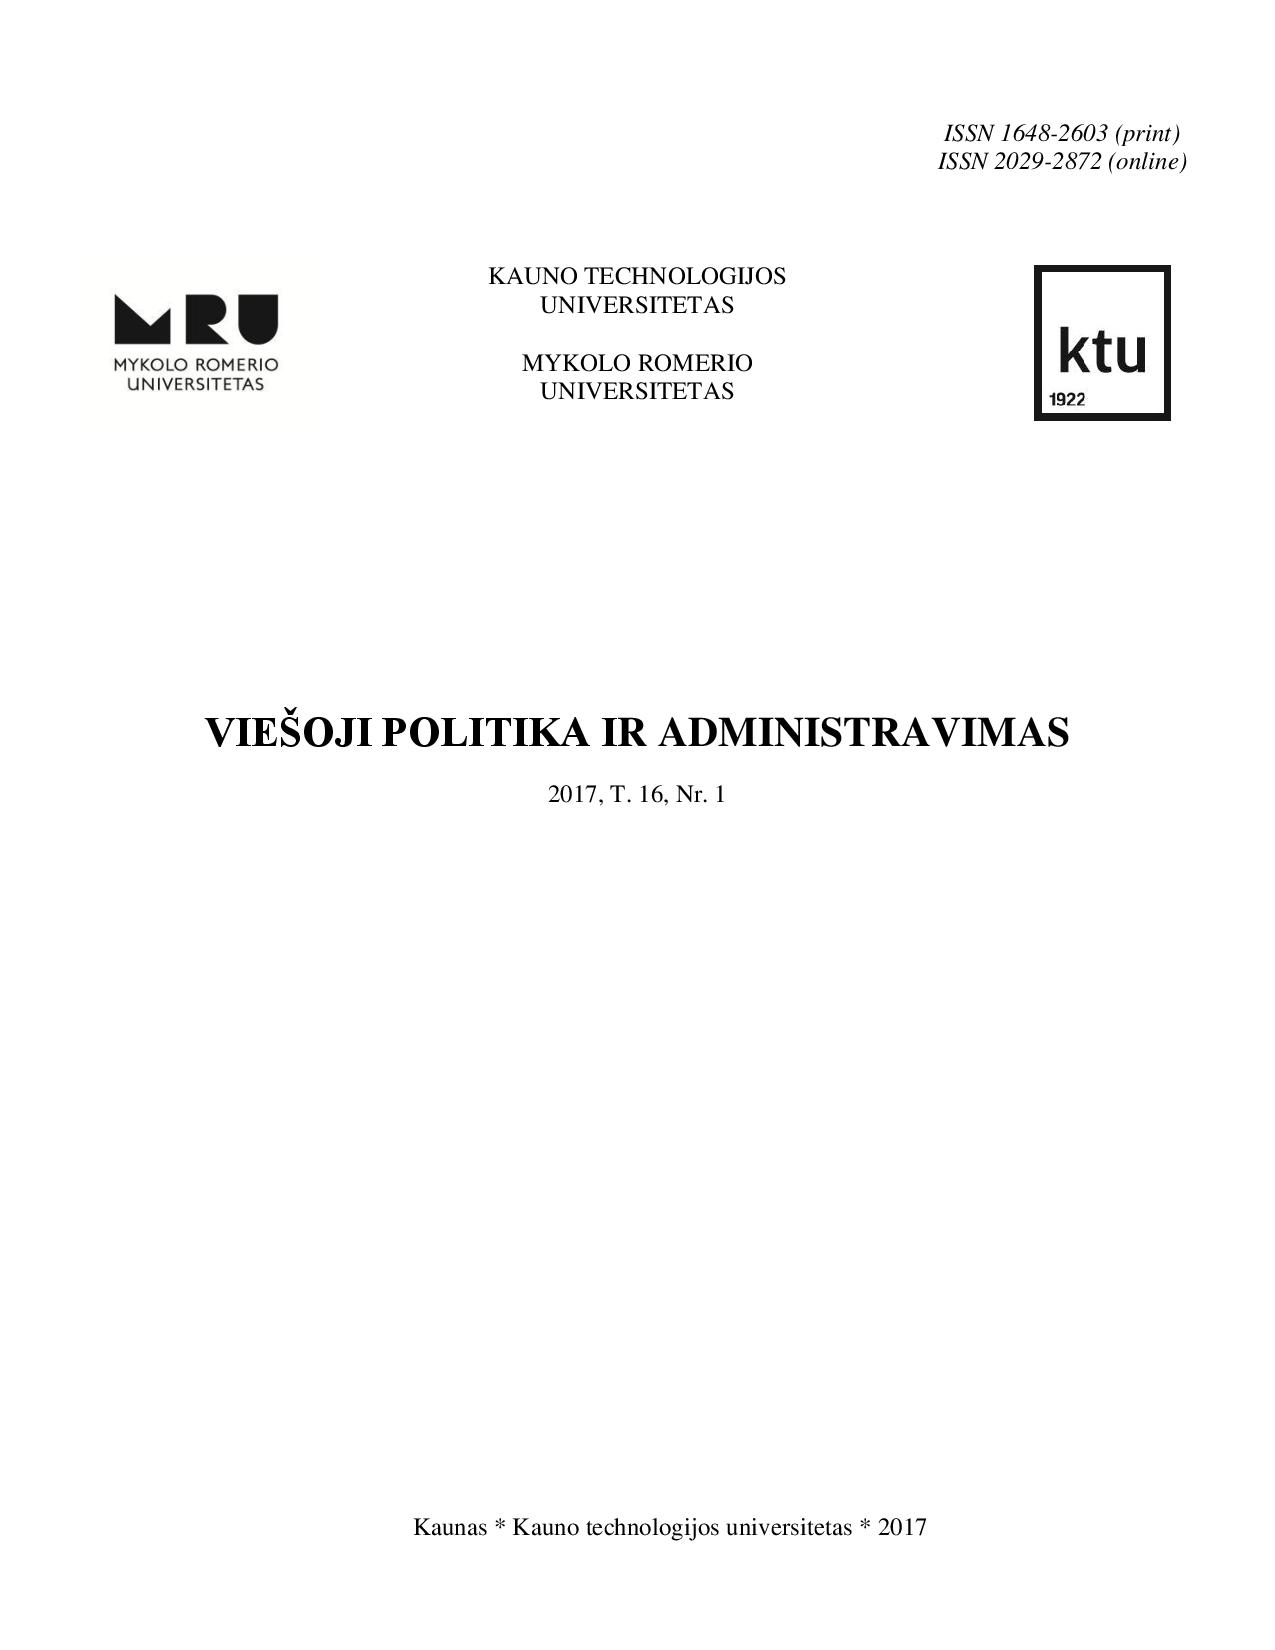 The Post-Soviet Syndrome of Ukrainian Education: Administrative Issues Cover Image